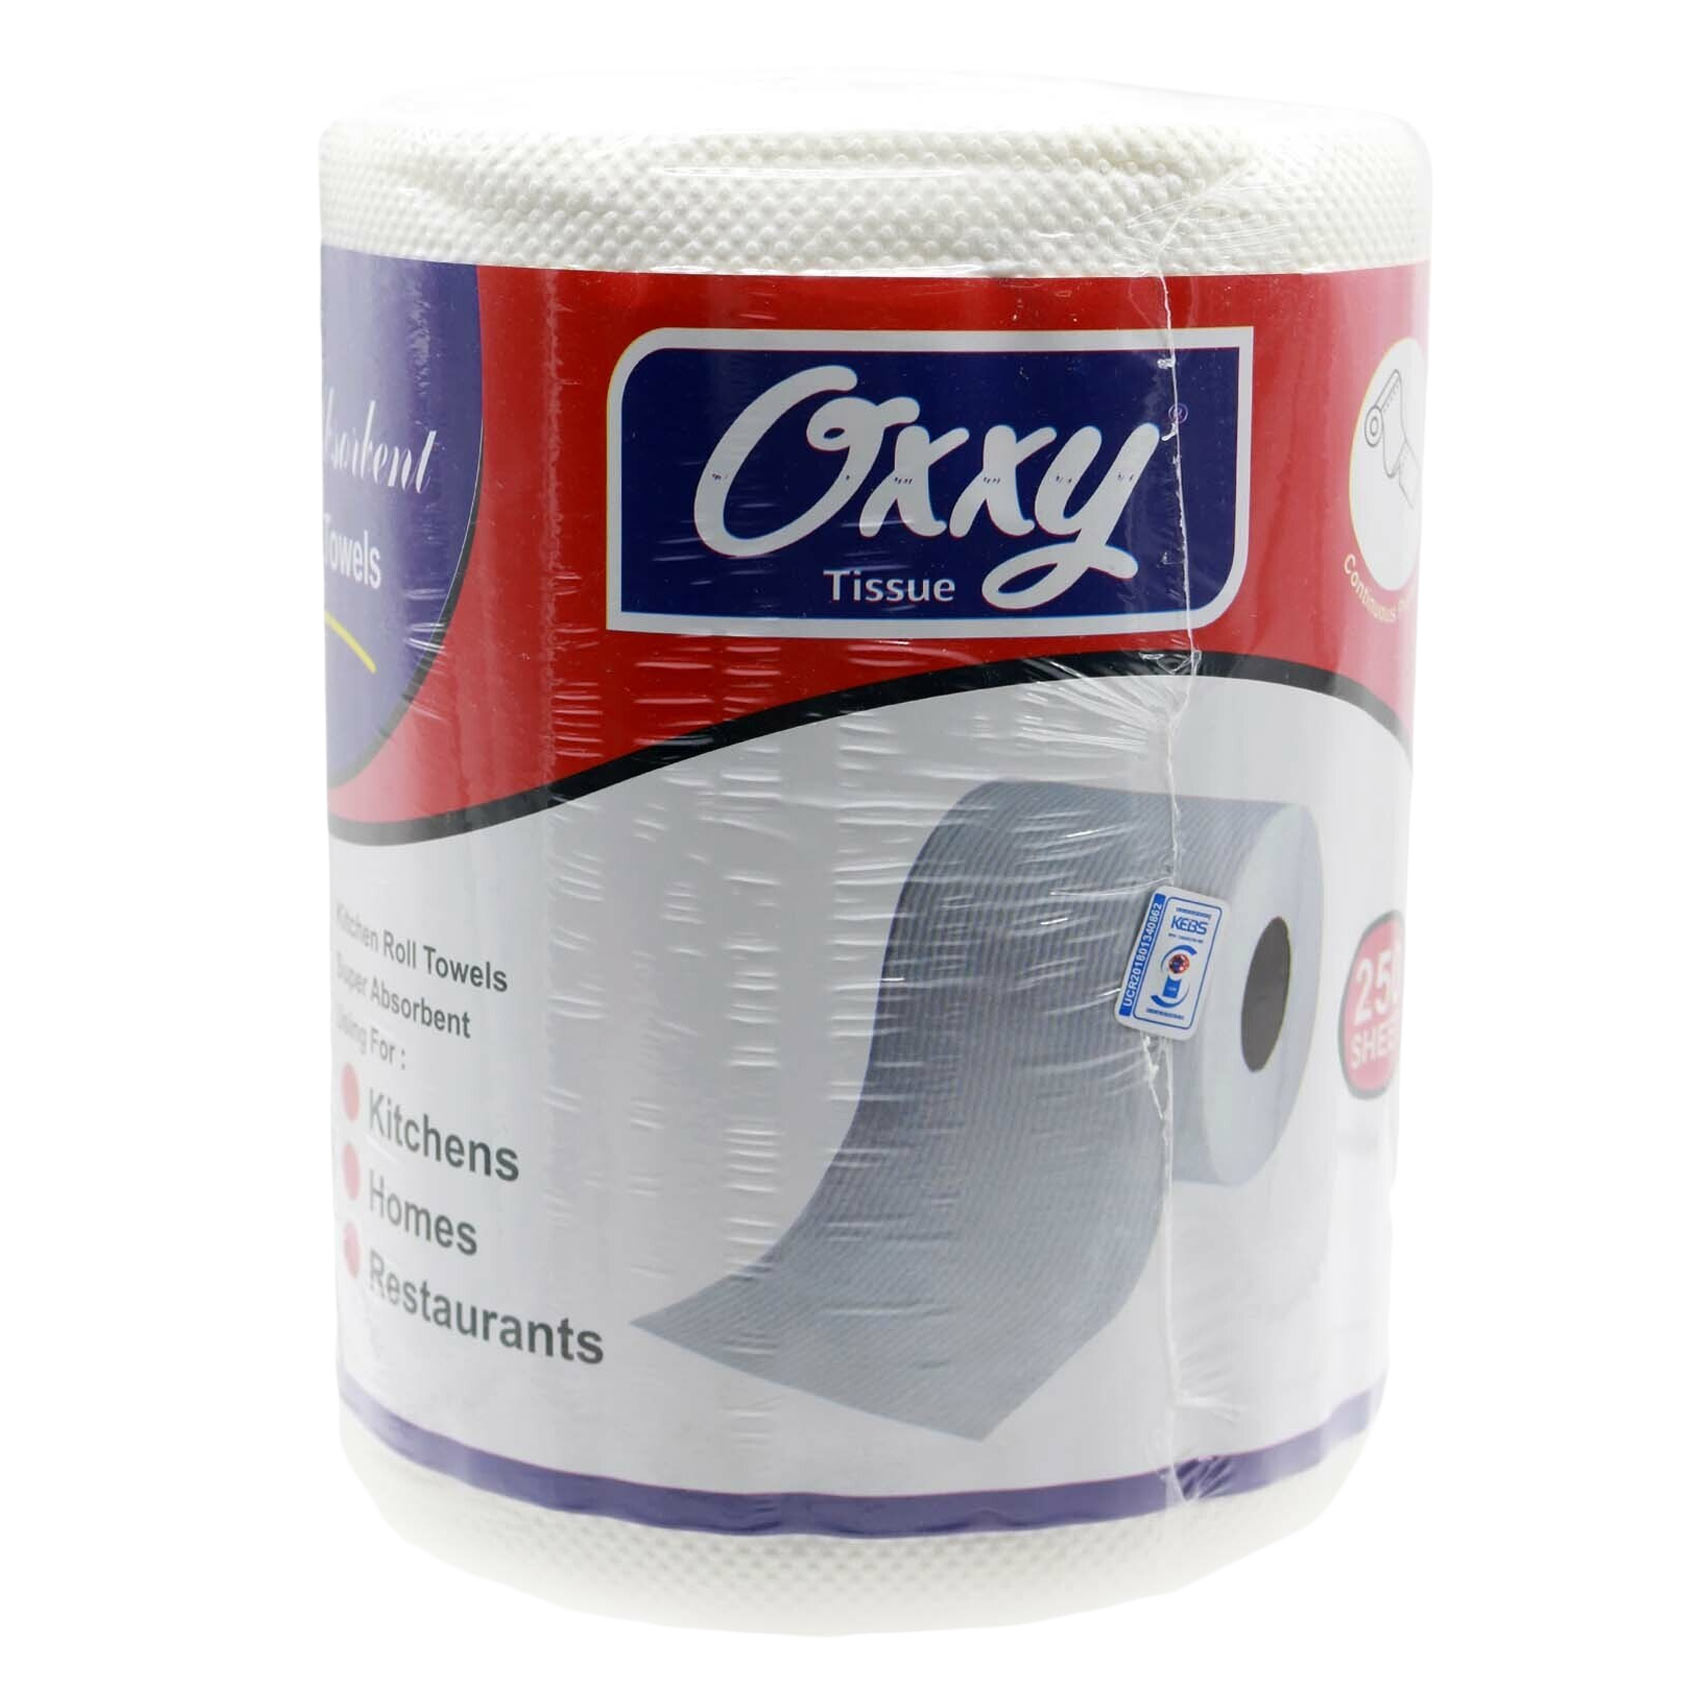 OXXY 250 SHEETS KITCHEN ROLLS